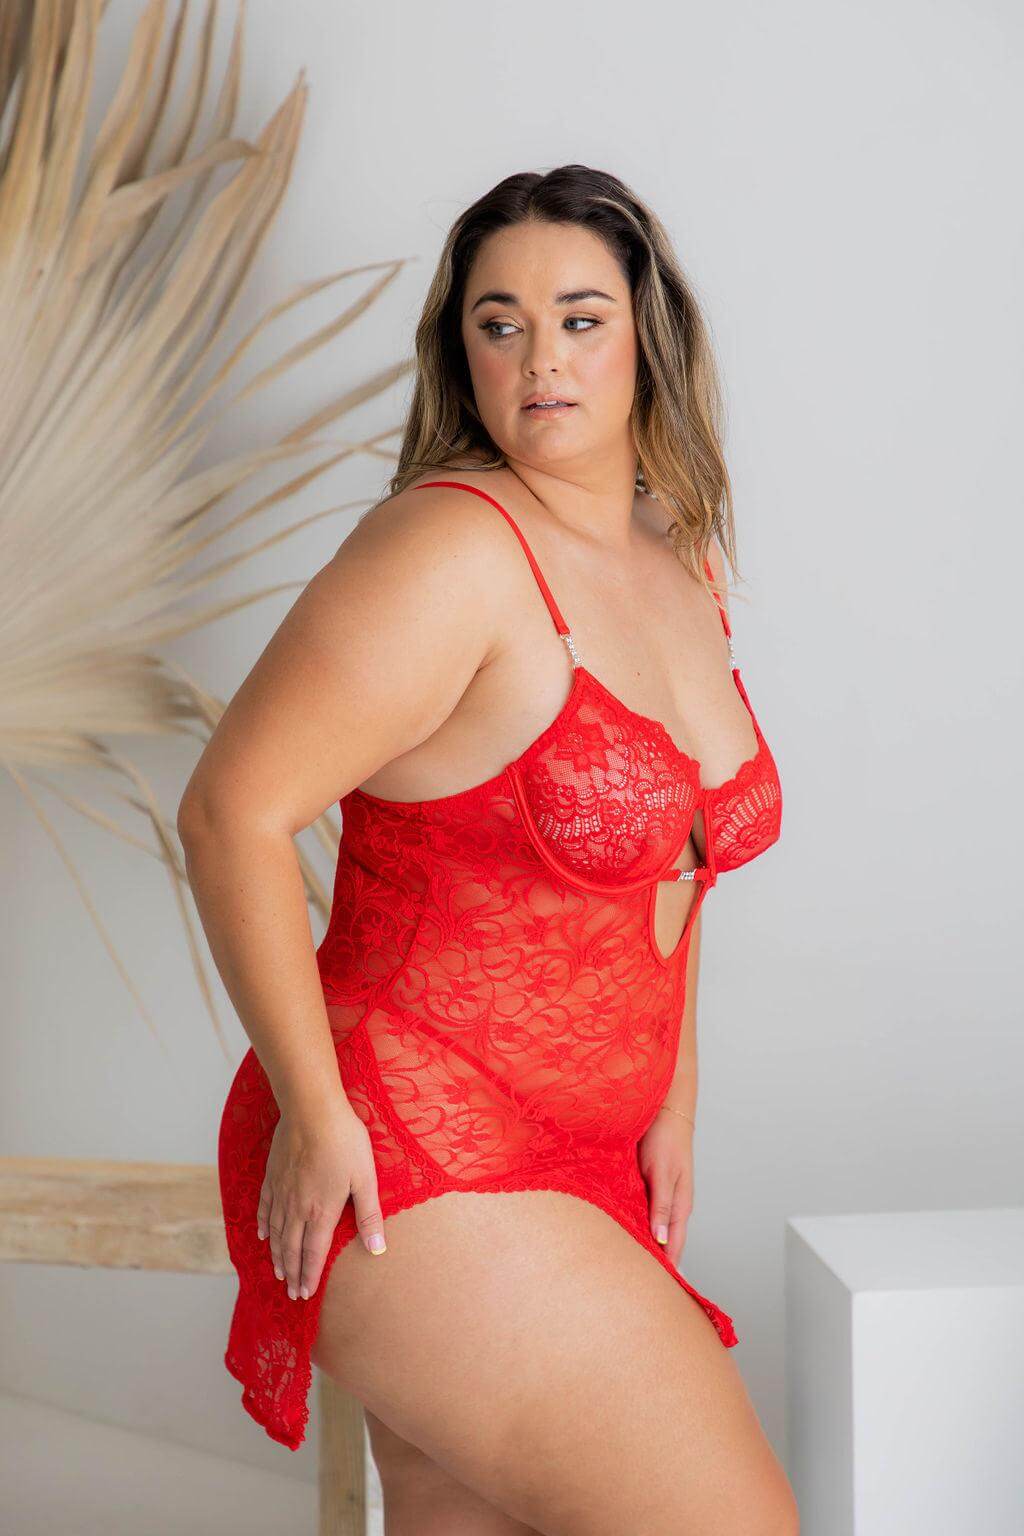 Cobra Red Lace Chemise - $45.00 - Corsets - Naked Curve